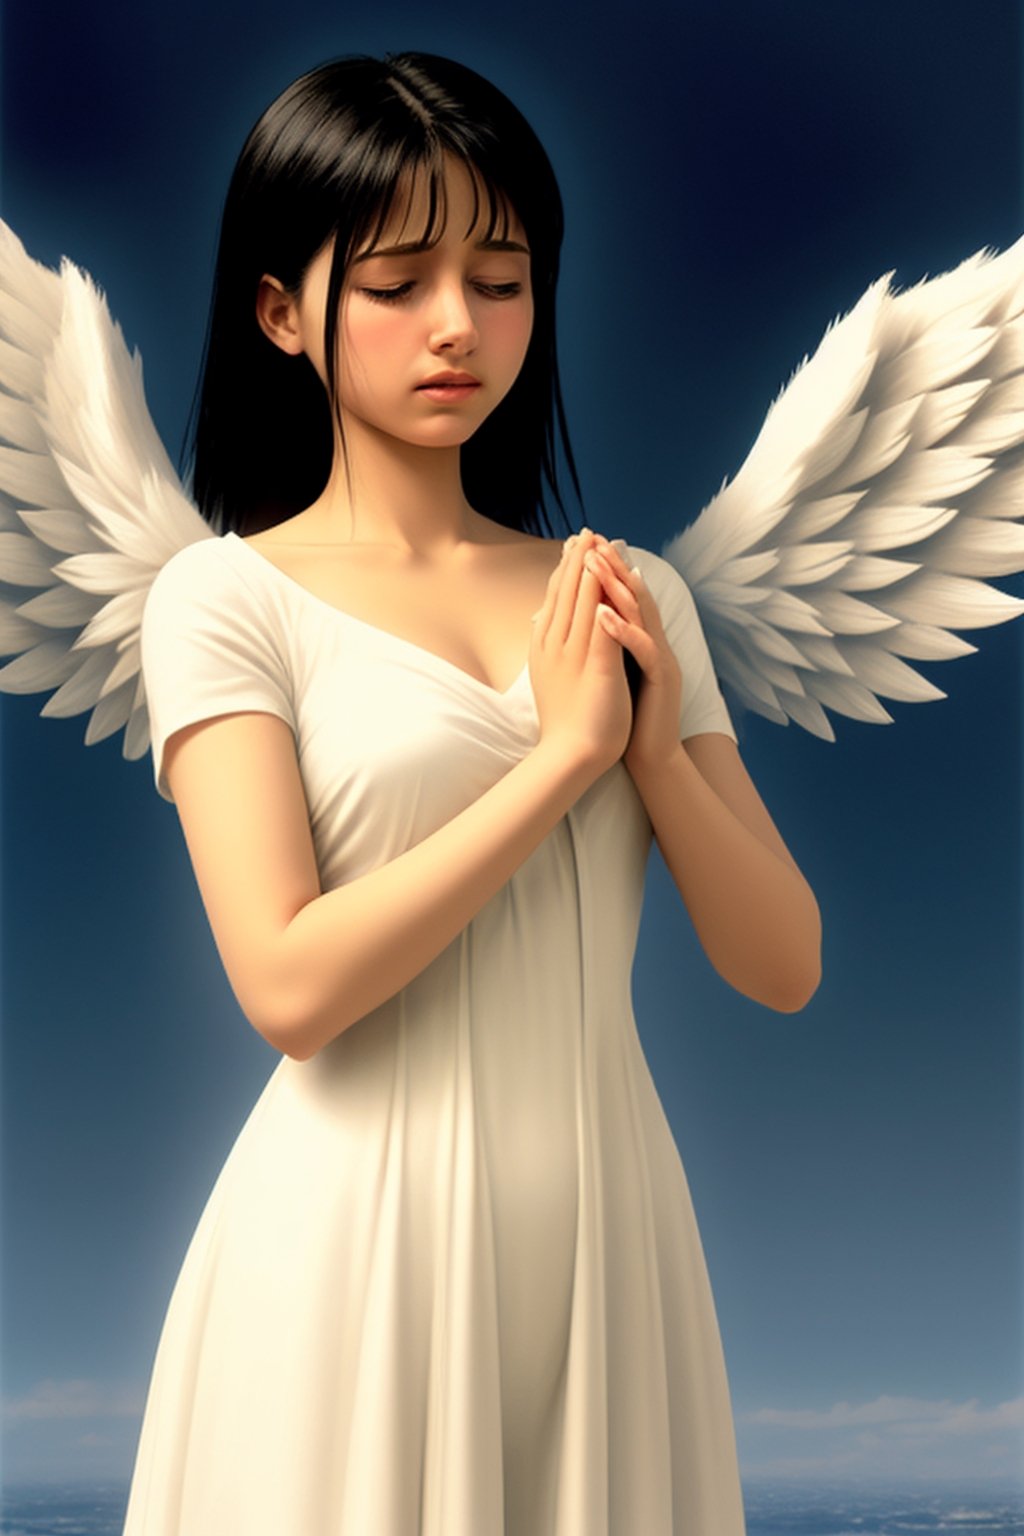 angel crying into her hands. stood side on.